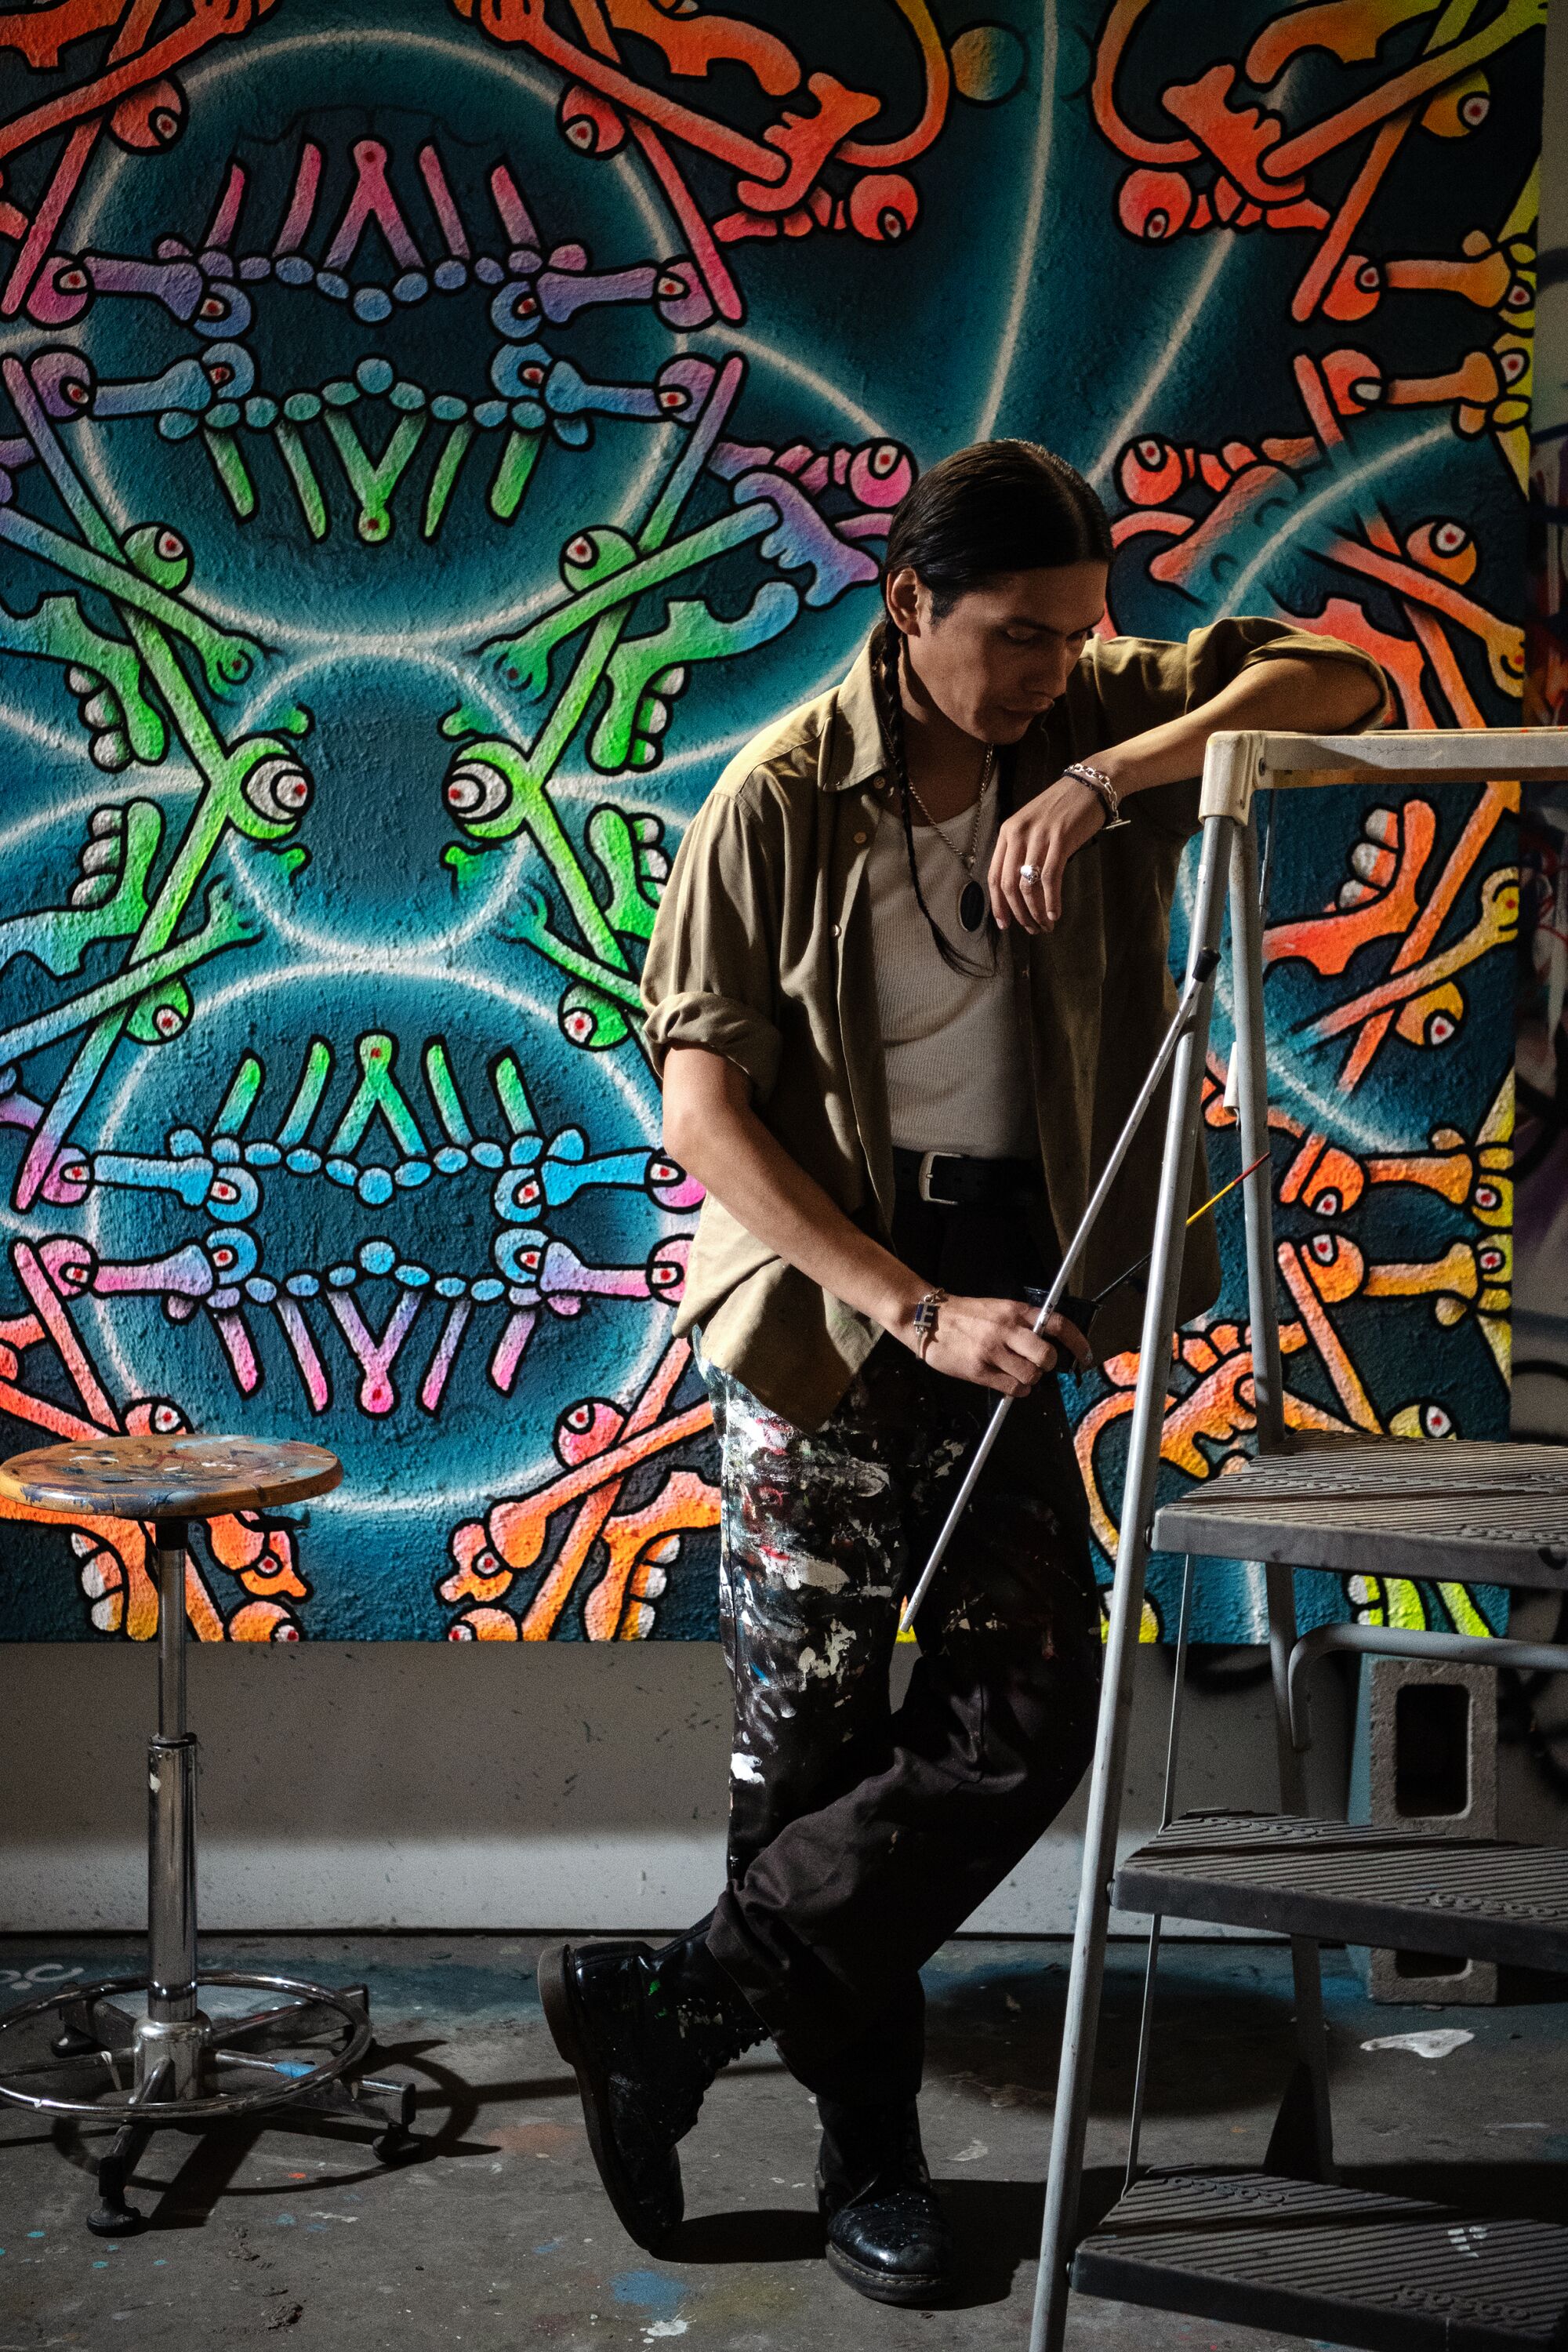 ozzie juarez leans on a stepladder, one of his vibrant paintings in the background